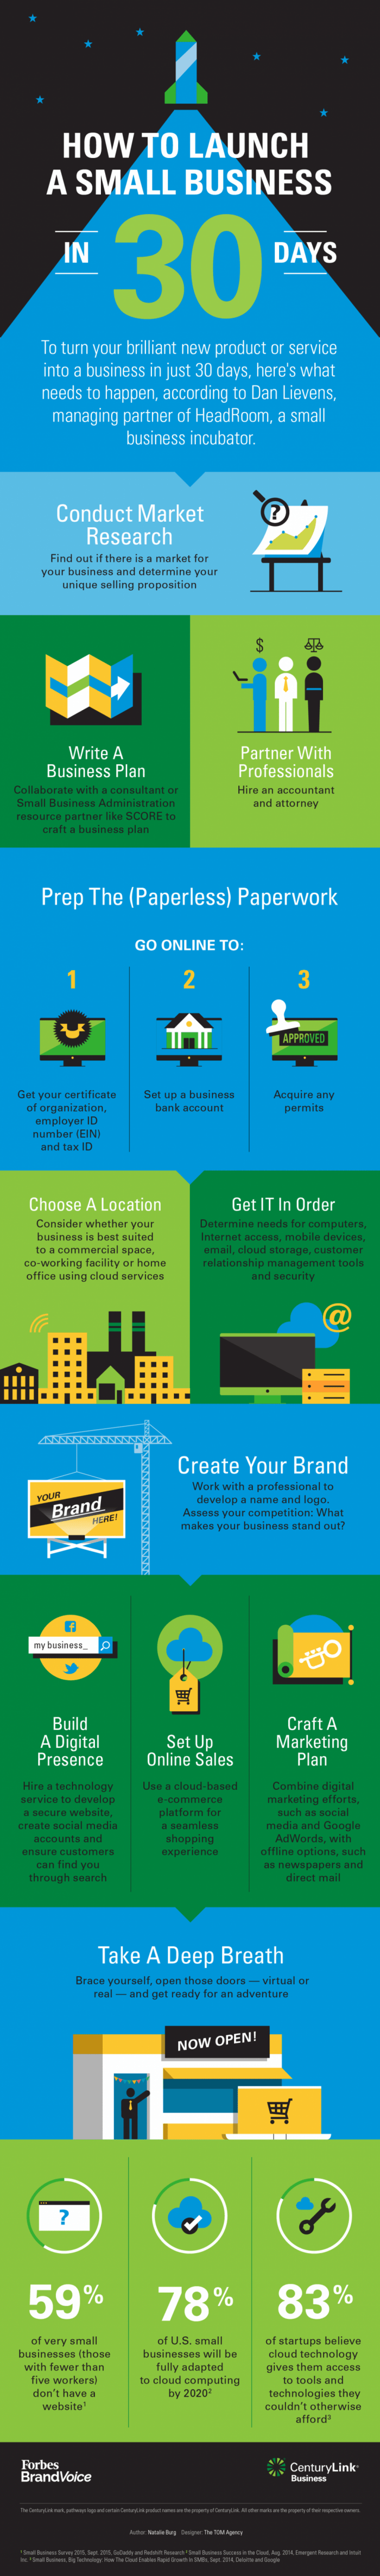 infographic describes how to launch a business in 30 days